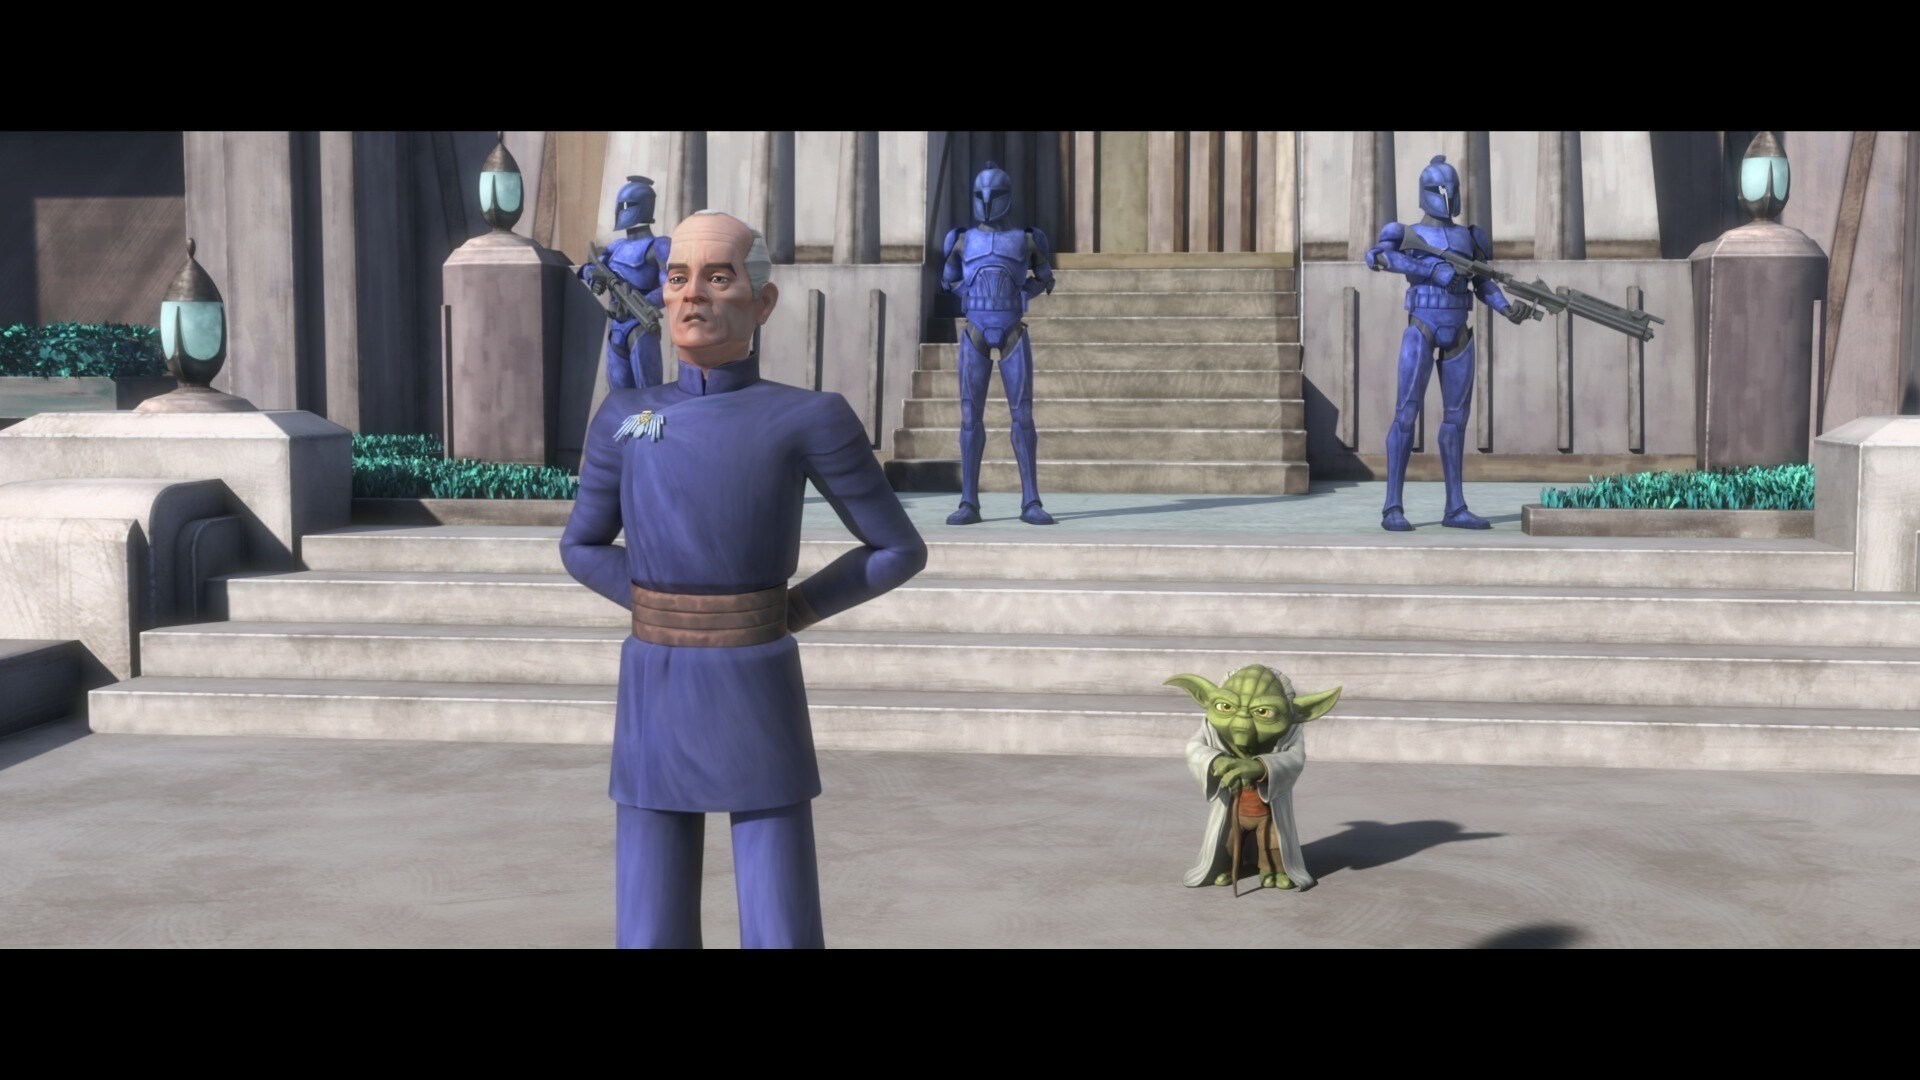 Speaking with Valorum at the former Chancellor's residence, Yoda learns that Valorum had assigned...